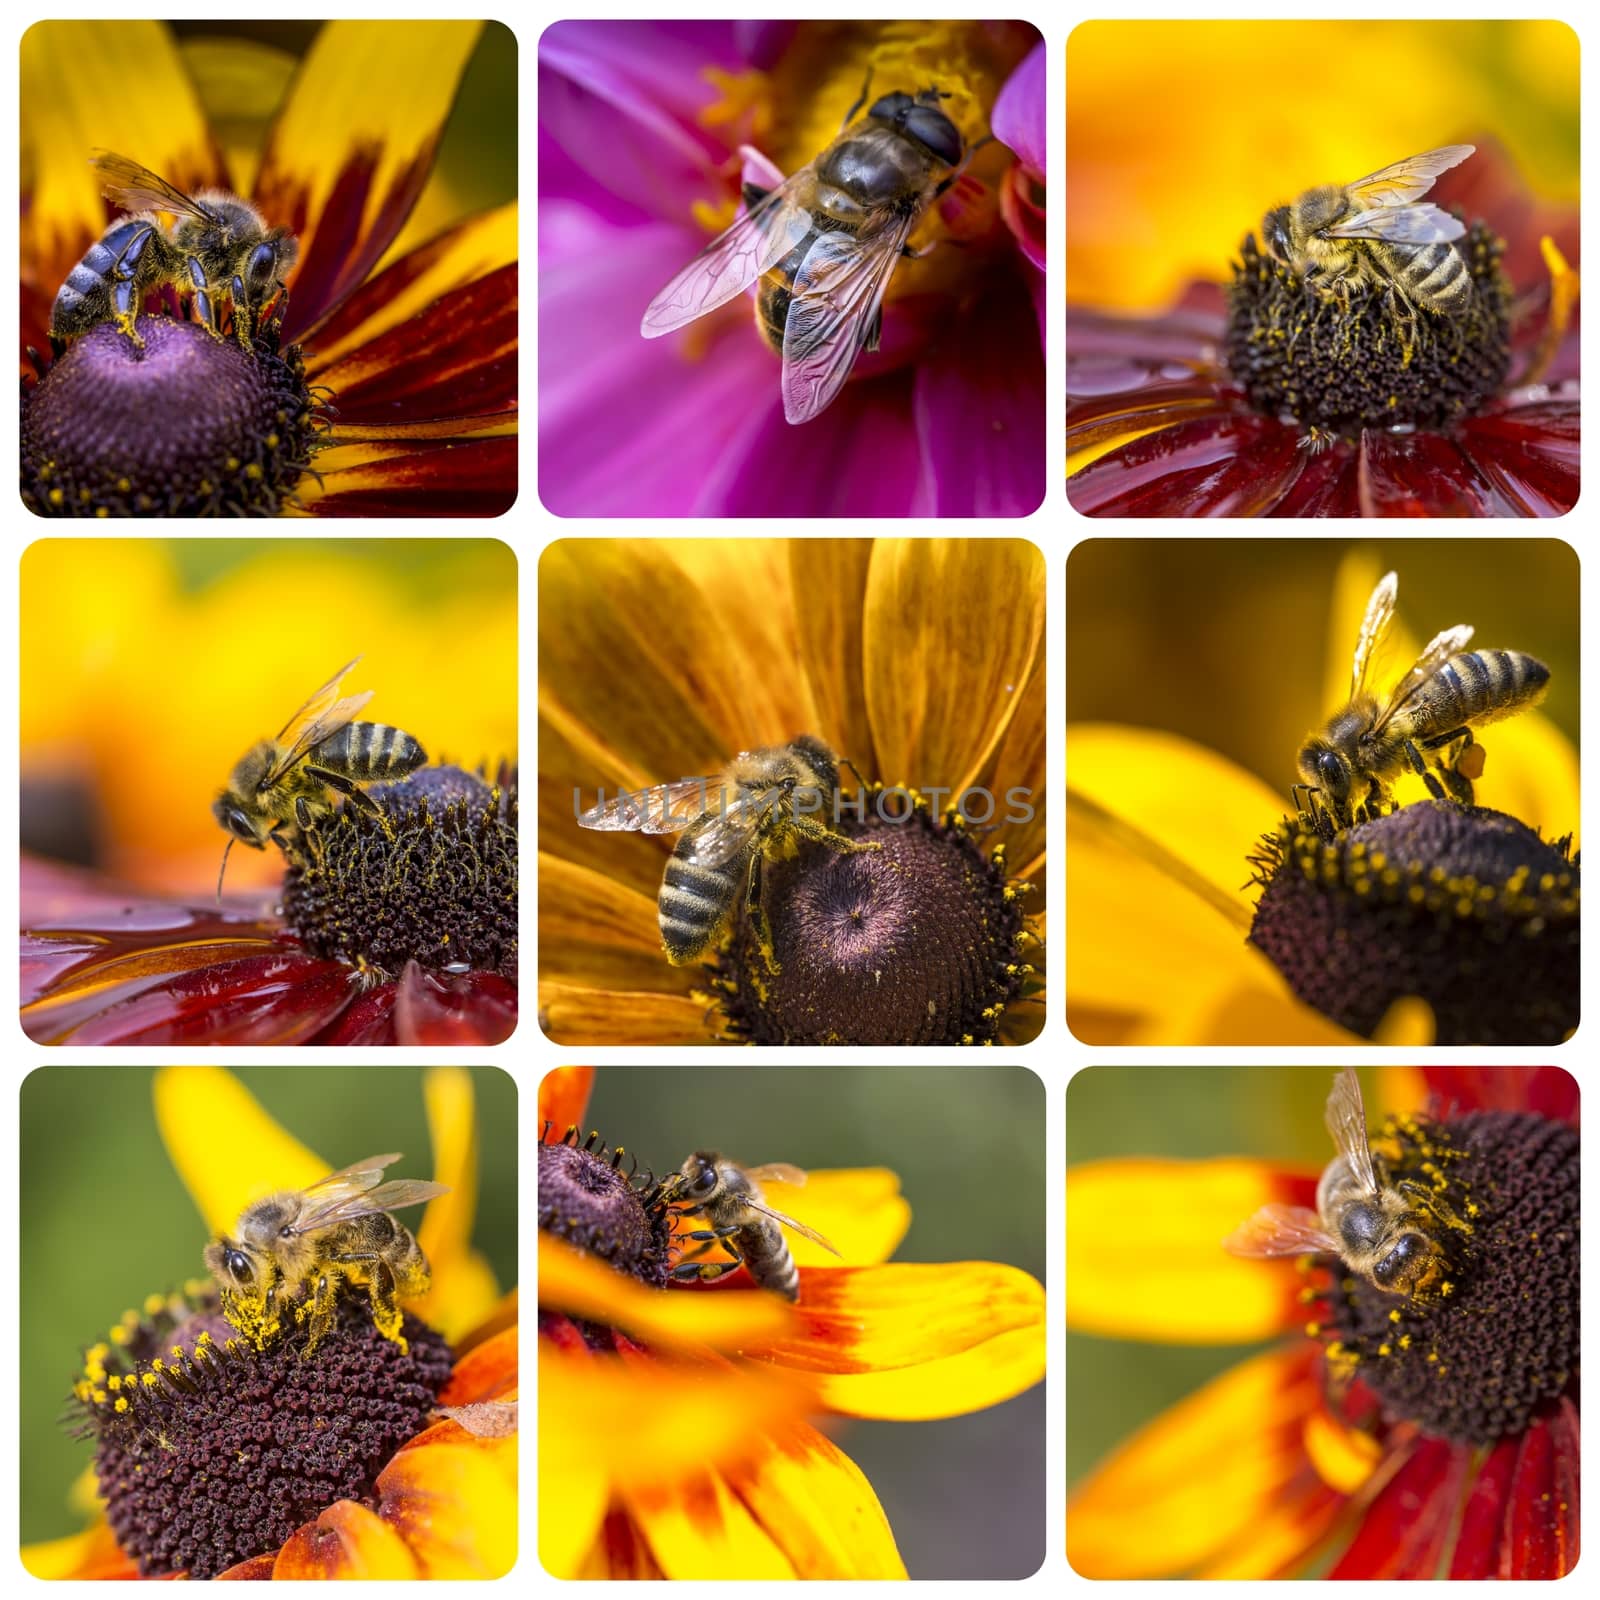 Collage of Western Honey Bee images - travel background (my phot by mariusz_prusaczyk